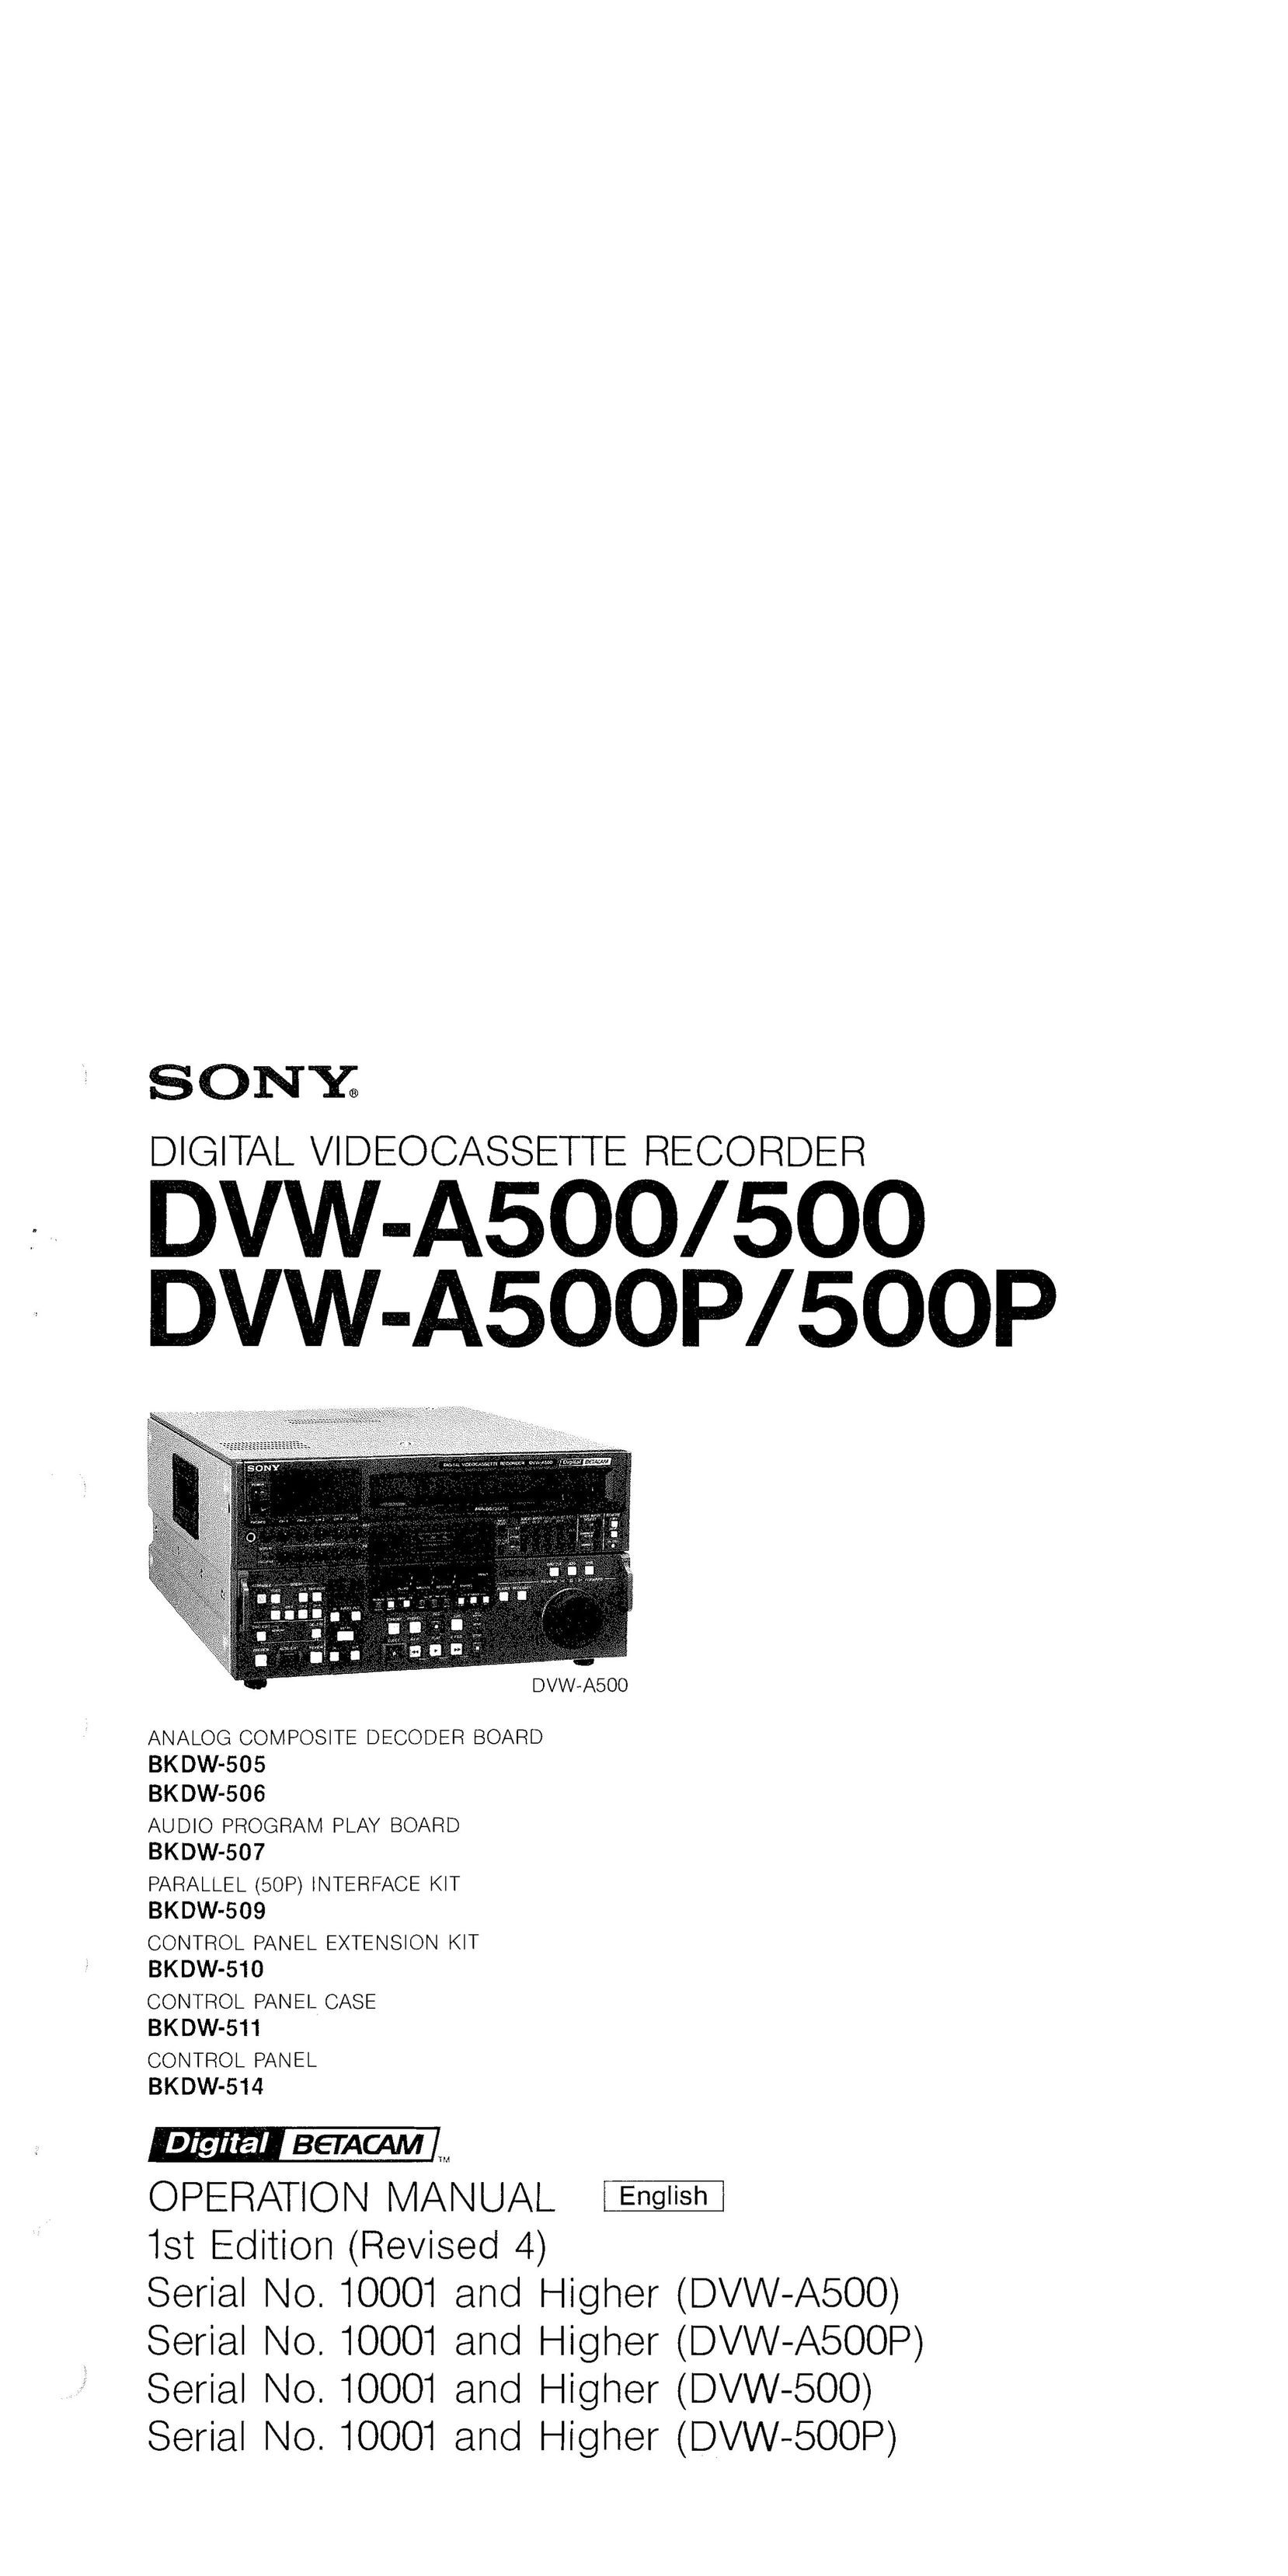 Sony 500P VCR User Manual